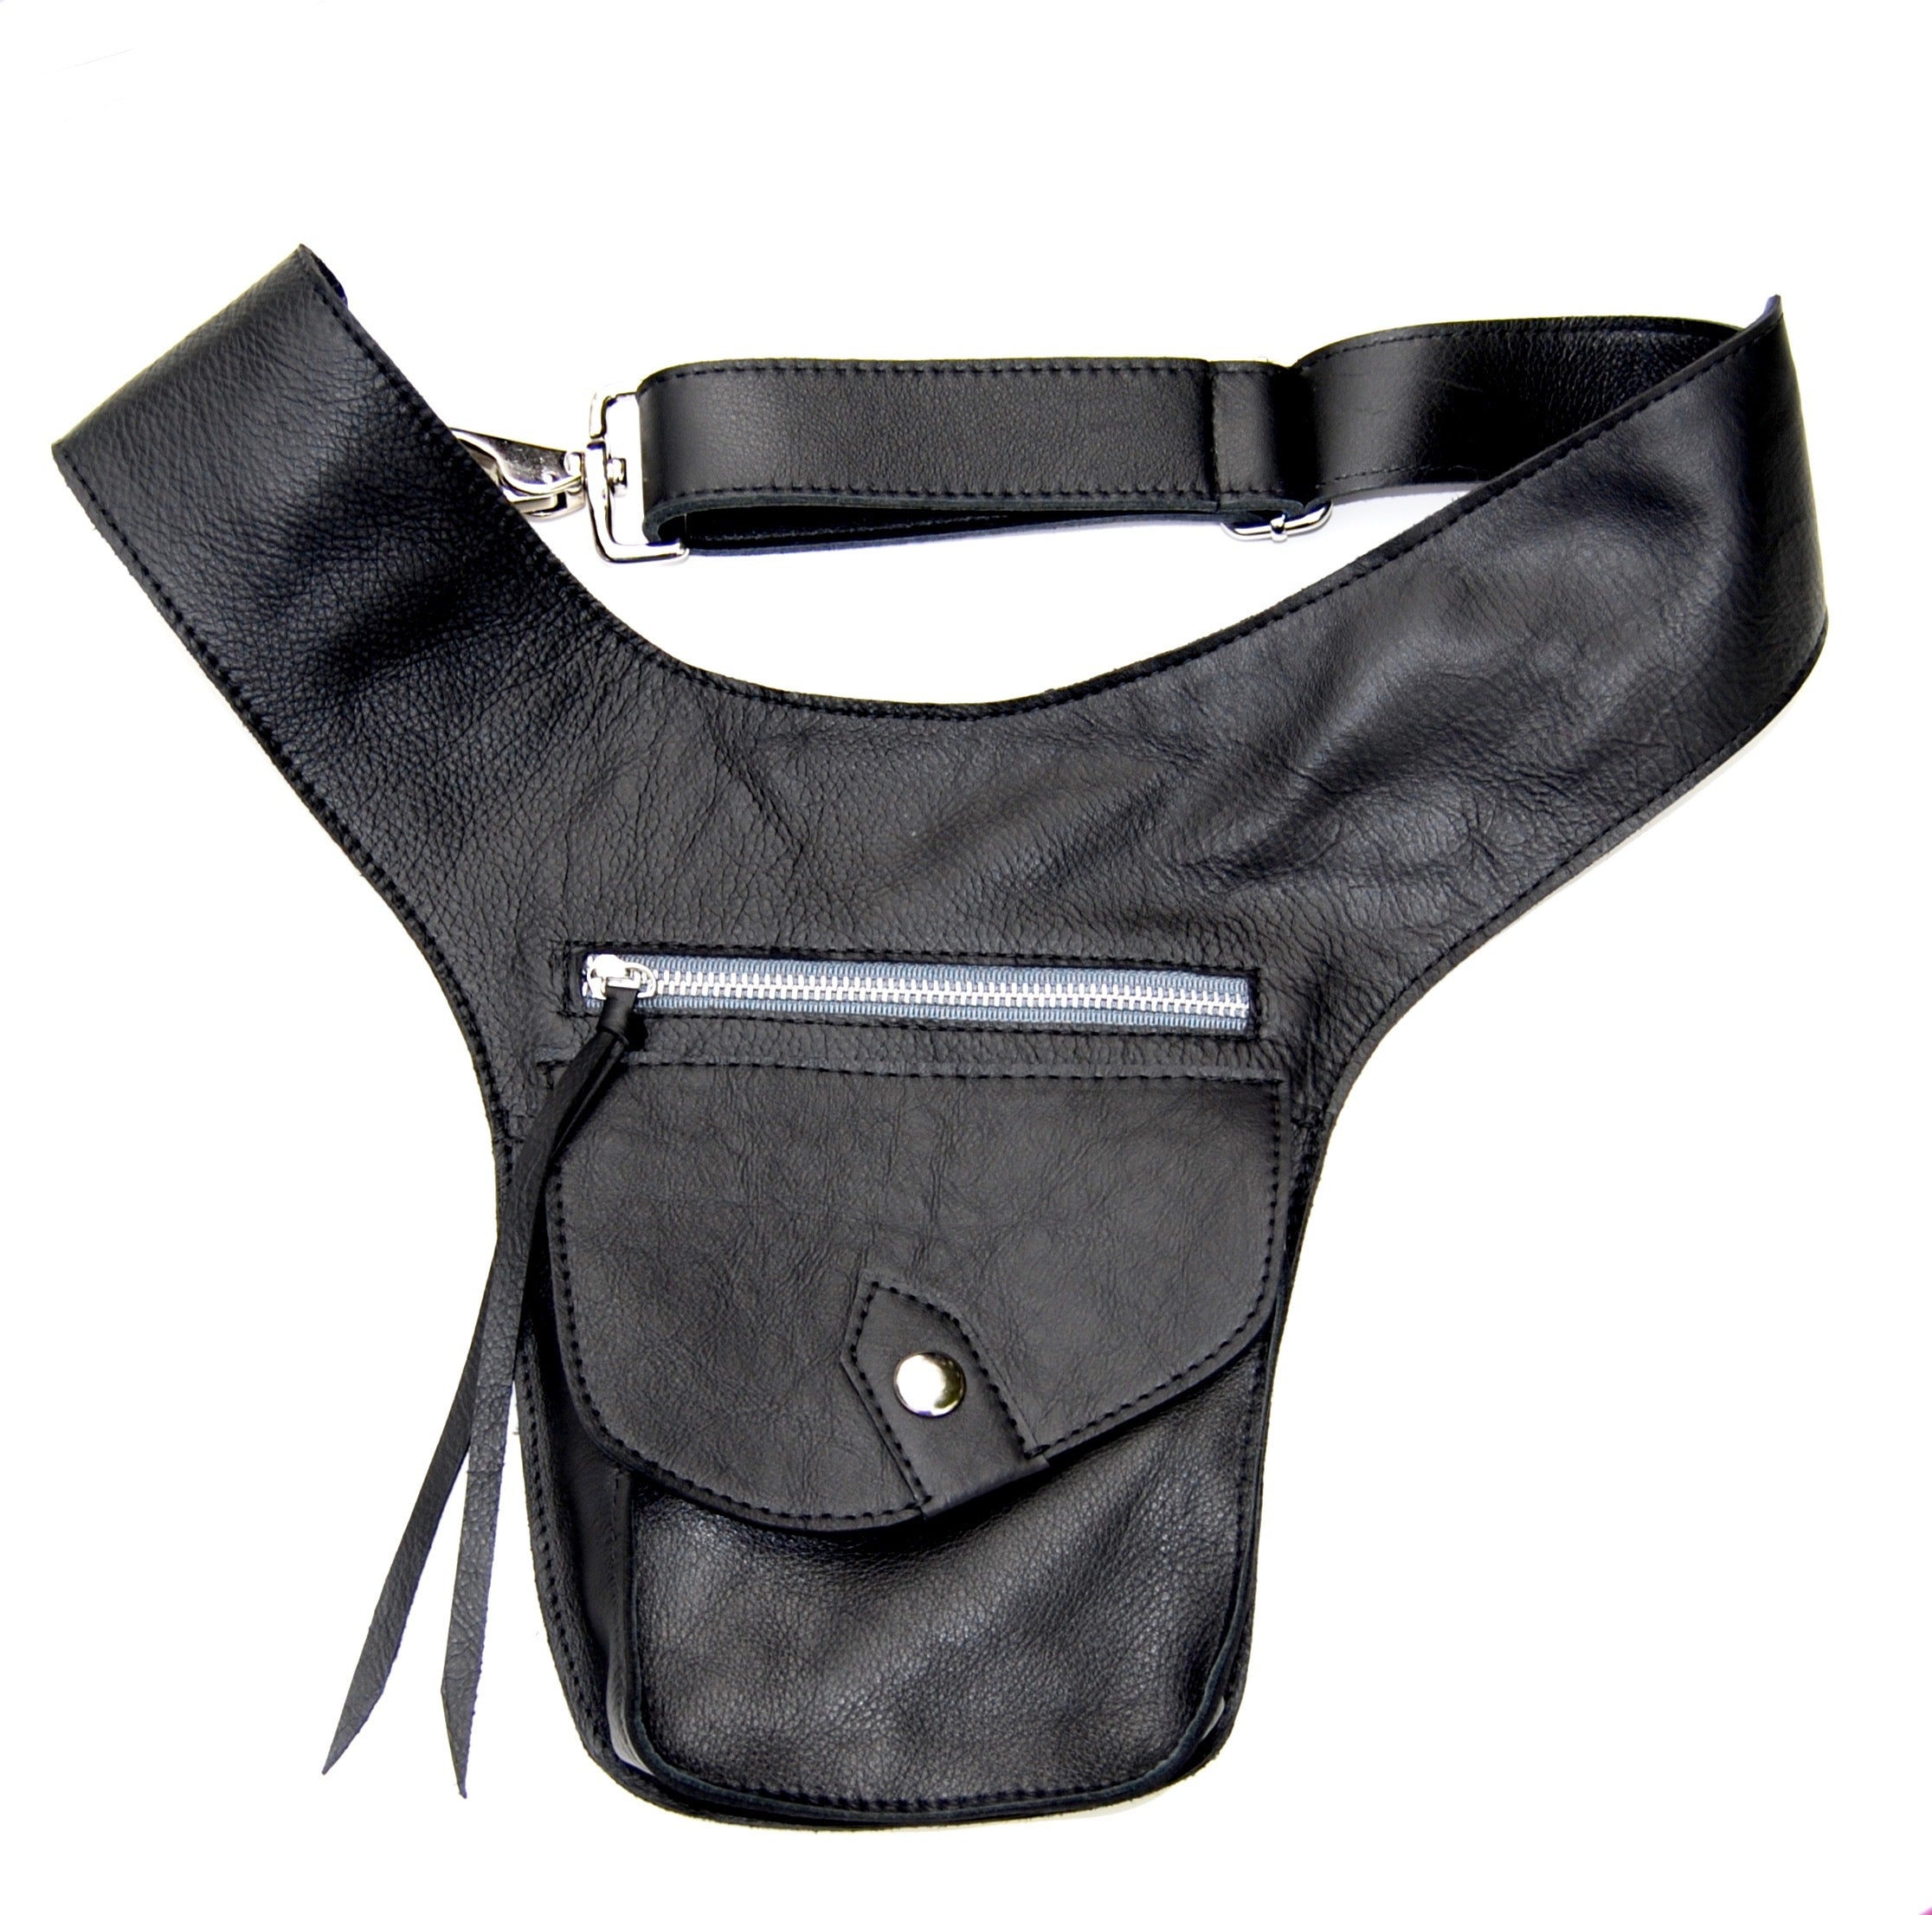 RIDE HOLSTER in black | Equestrian Leather Bag | Holster Bag For Phone and Wallet | Waist Bag - AtelierCG™